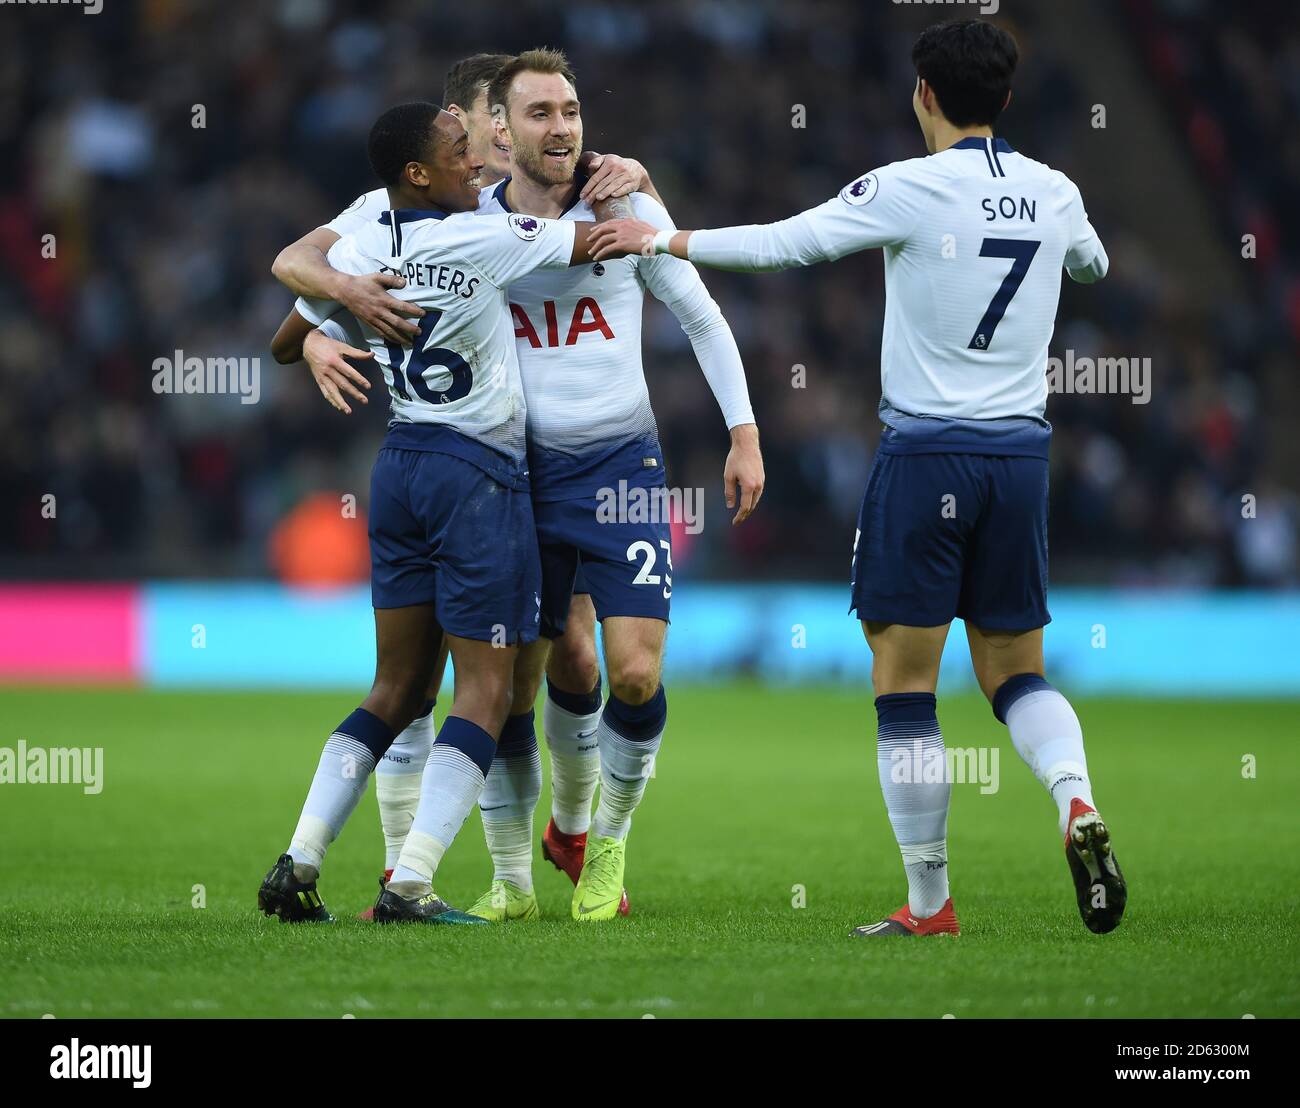 Tottenham Hotspur's Christian Eriksen celebrates scoring his side's first goal of the game with Kyle Walker-Peters (left) and Son Heung-min Stock Photo